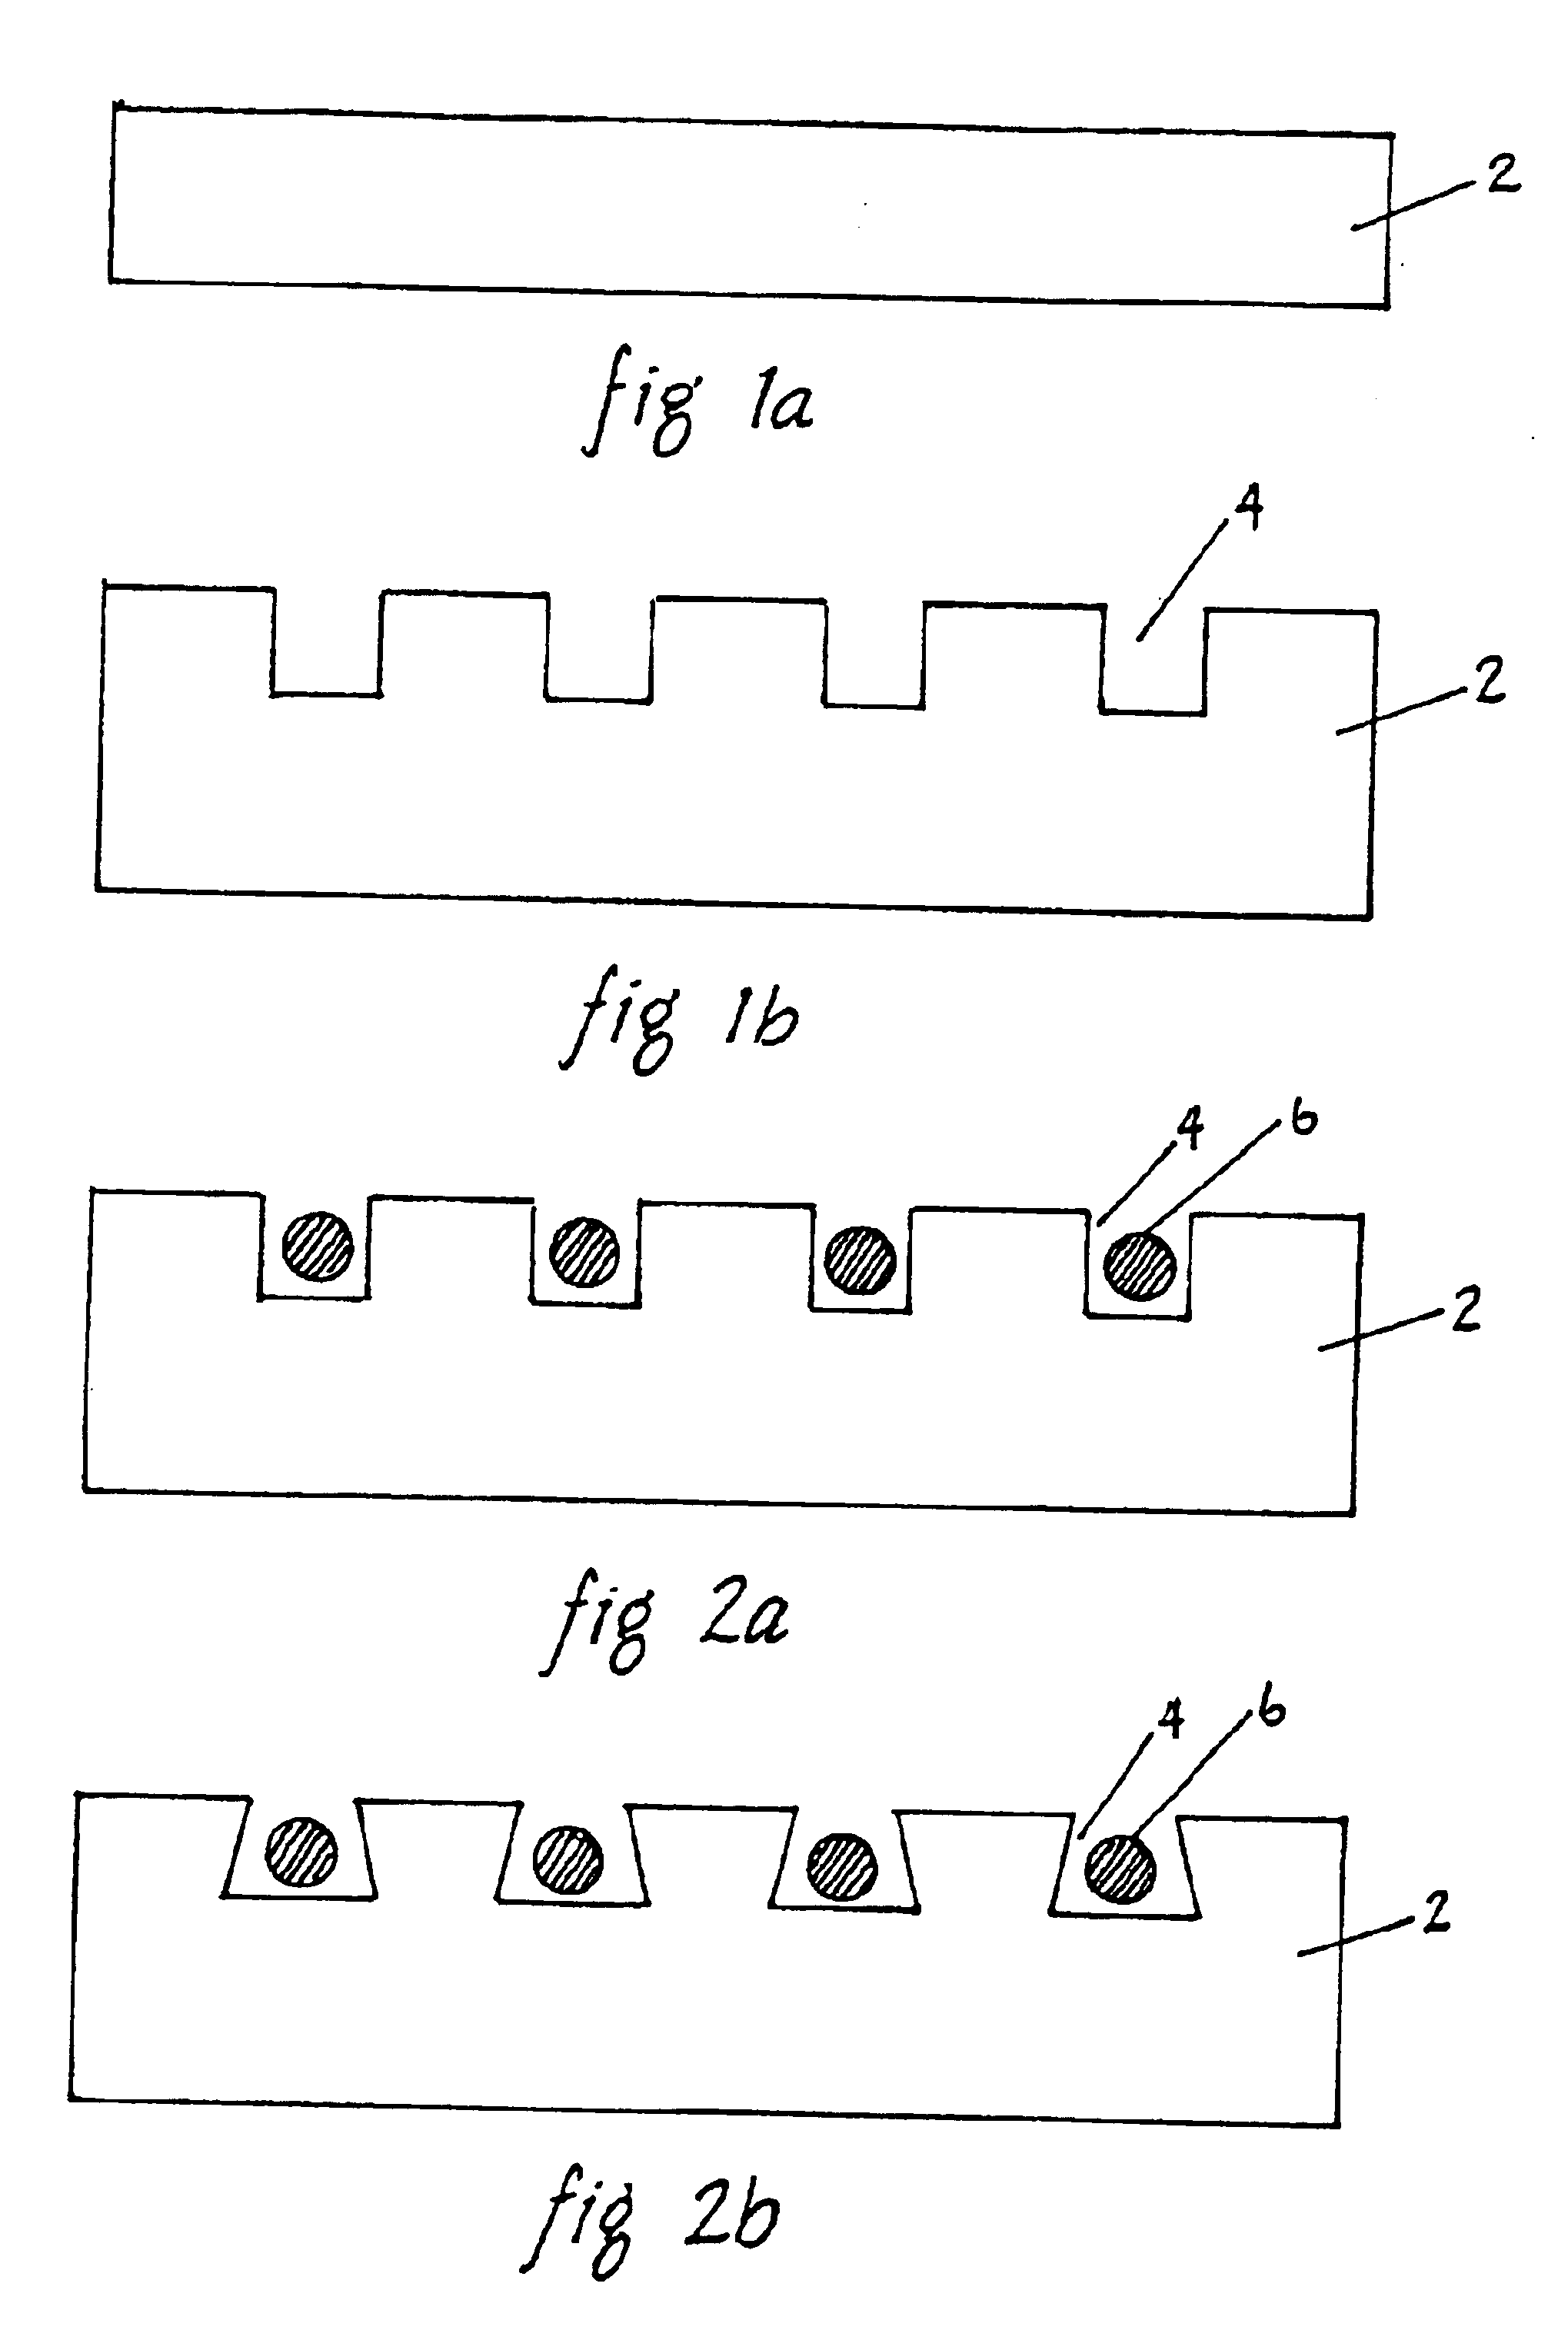 Implantable electrical cable and method of making